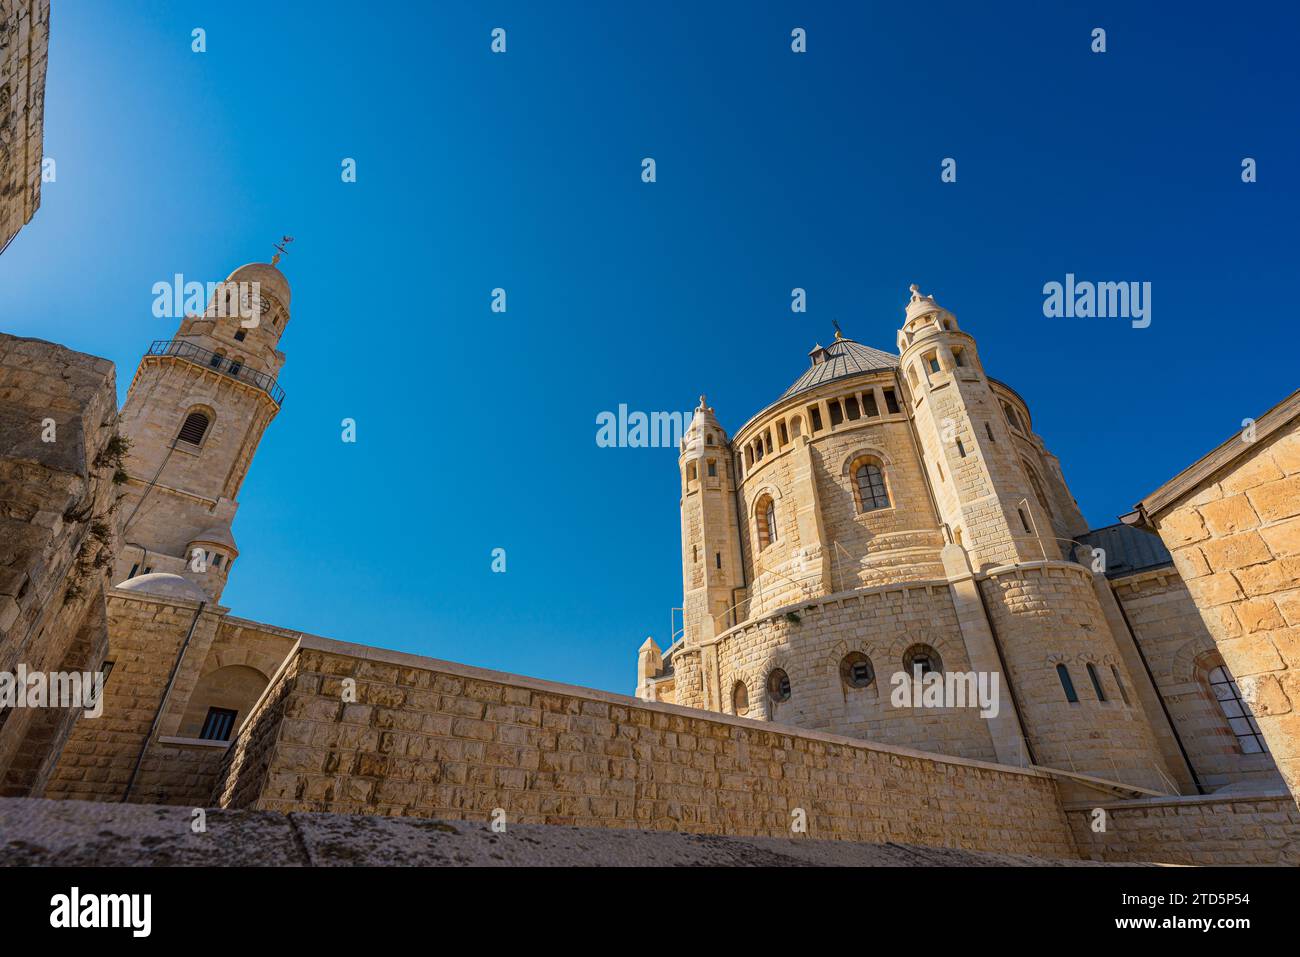 Exterior view of the Dormition Abbey, a Christian temple in Jerusalem, Israel Stock Photo